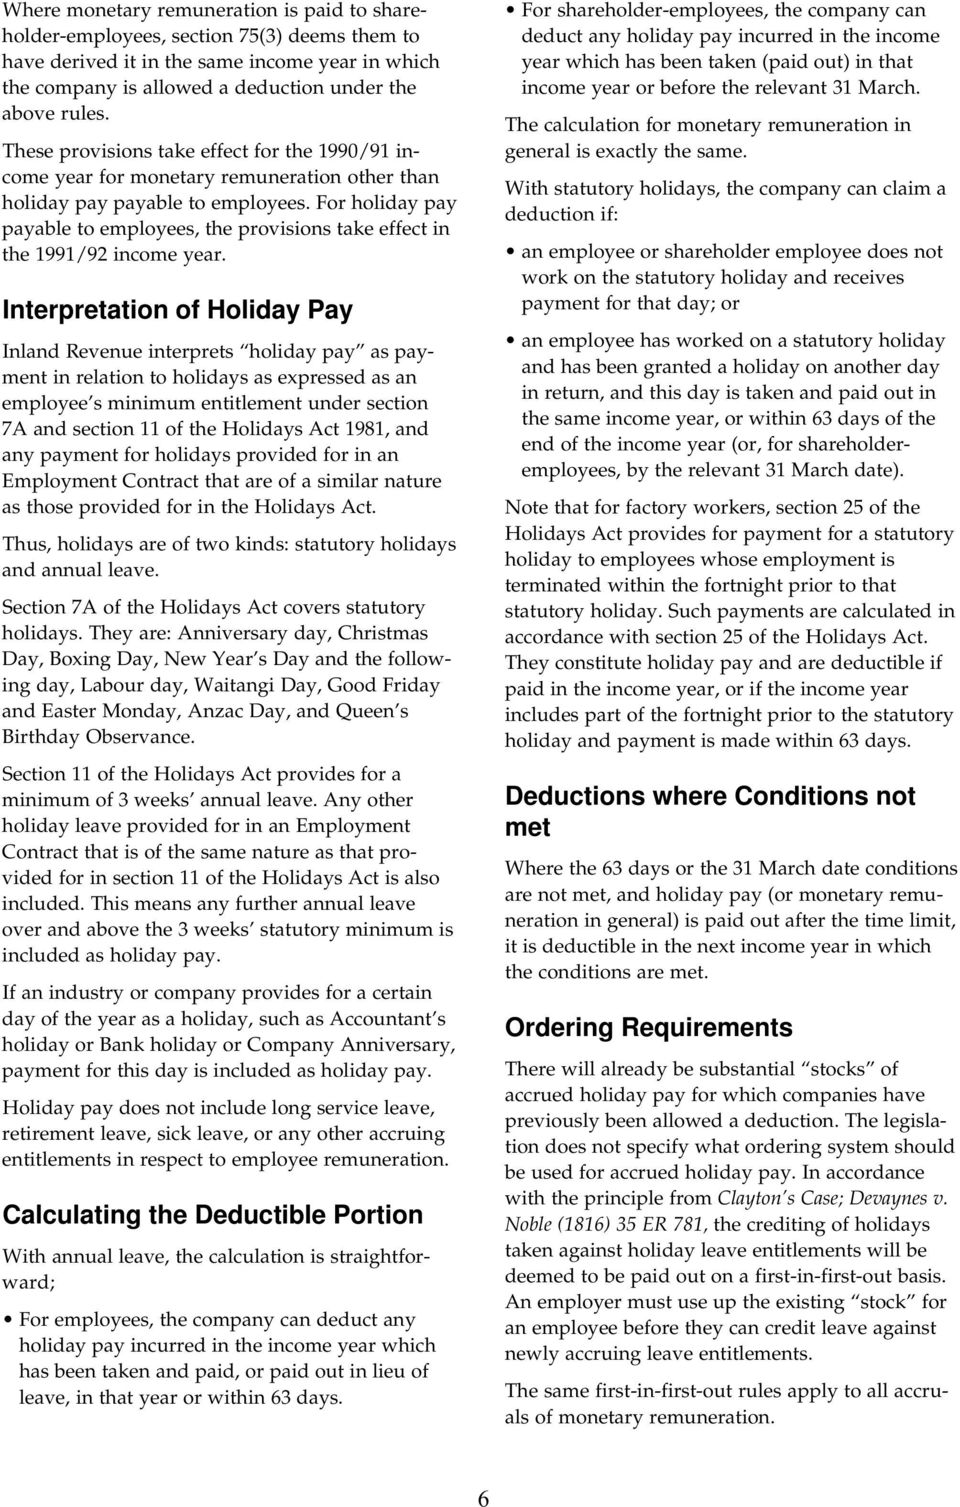 For holiday pay payable to employees, the provisions take effect in the 1991/92 income year.